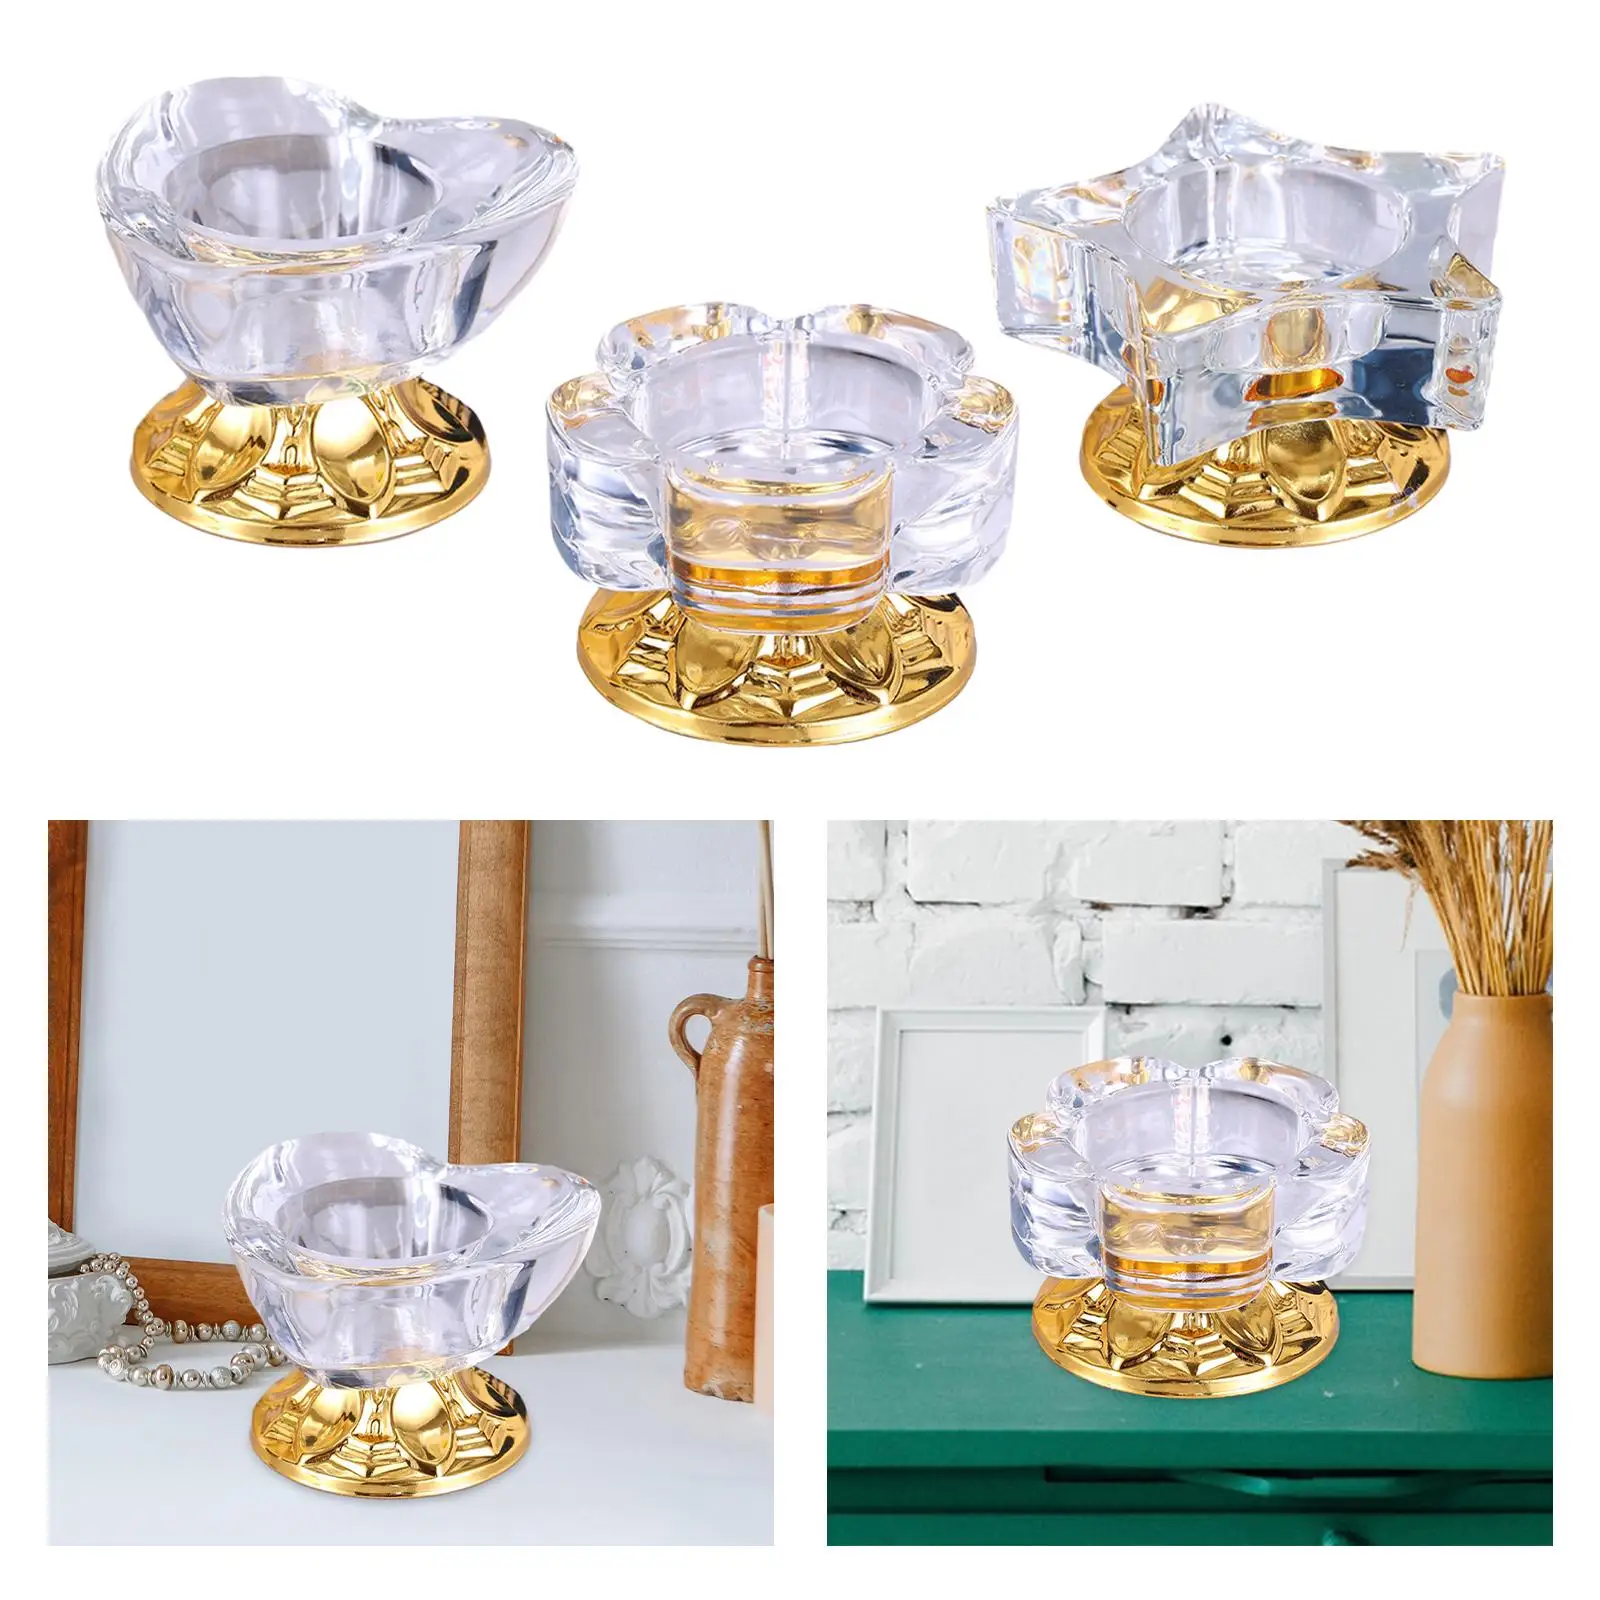 Candlestick Elegant Design Decorative Iron Glass Candle Holder for Housewarming Table Centerpiece Dining Room Living Room